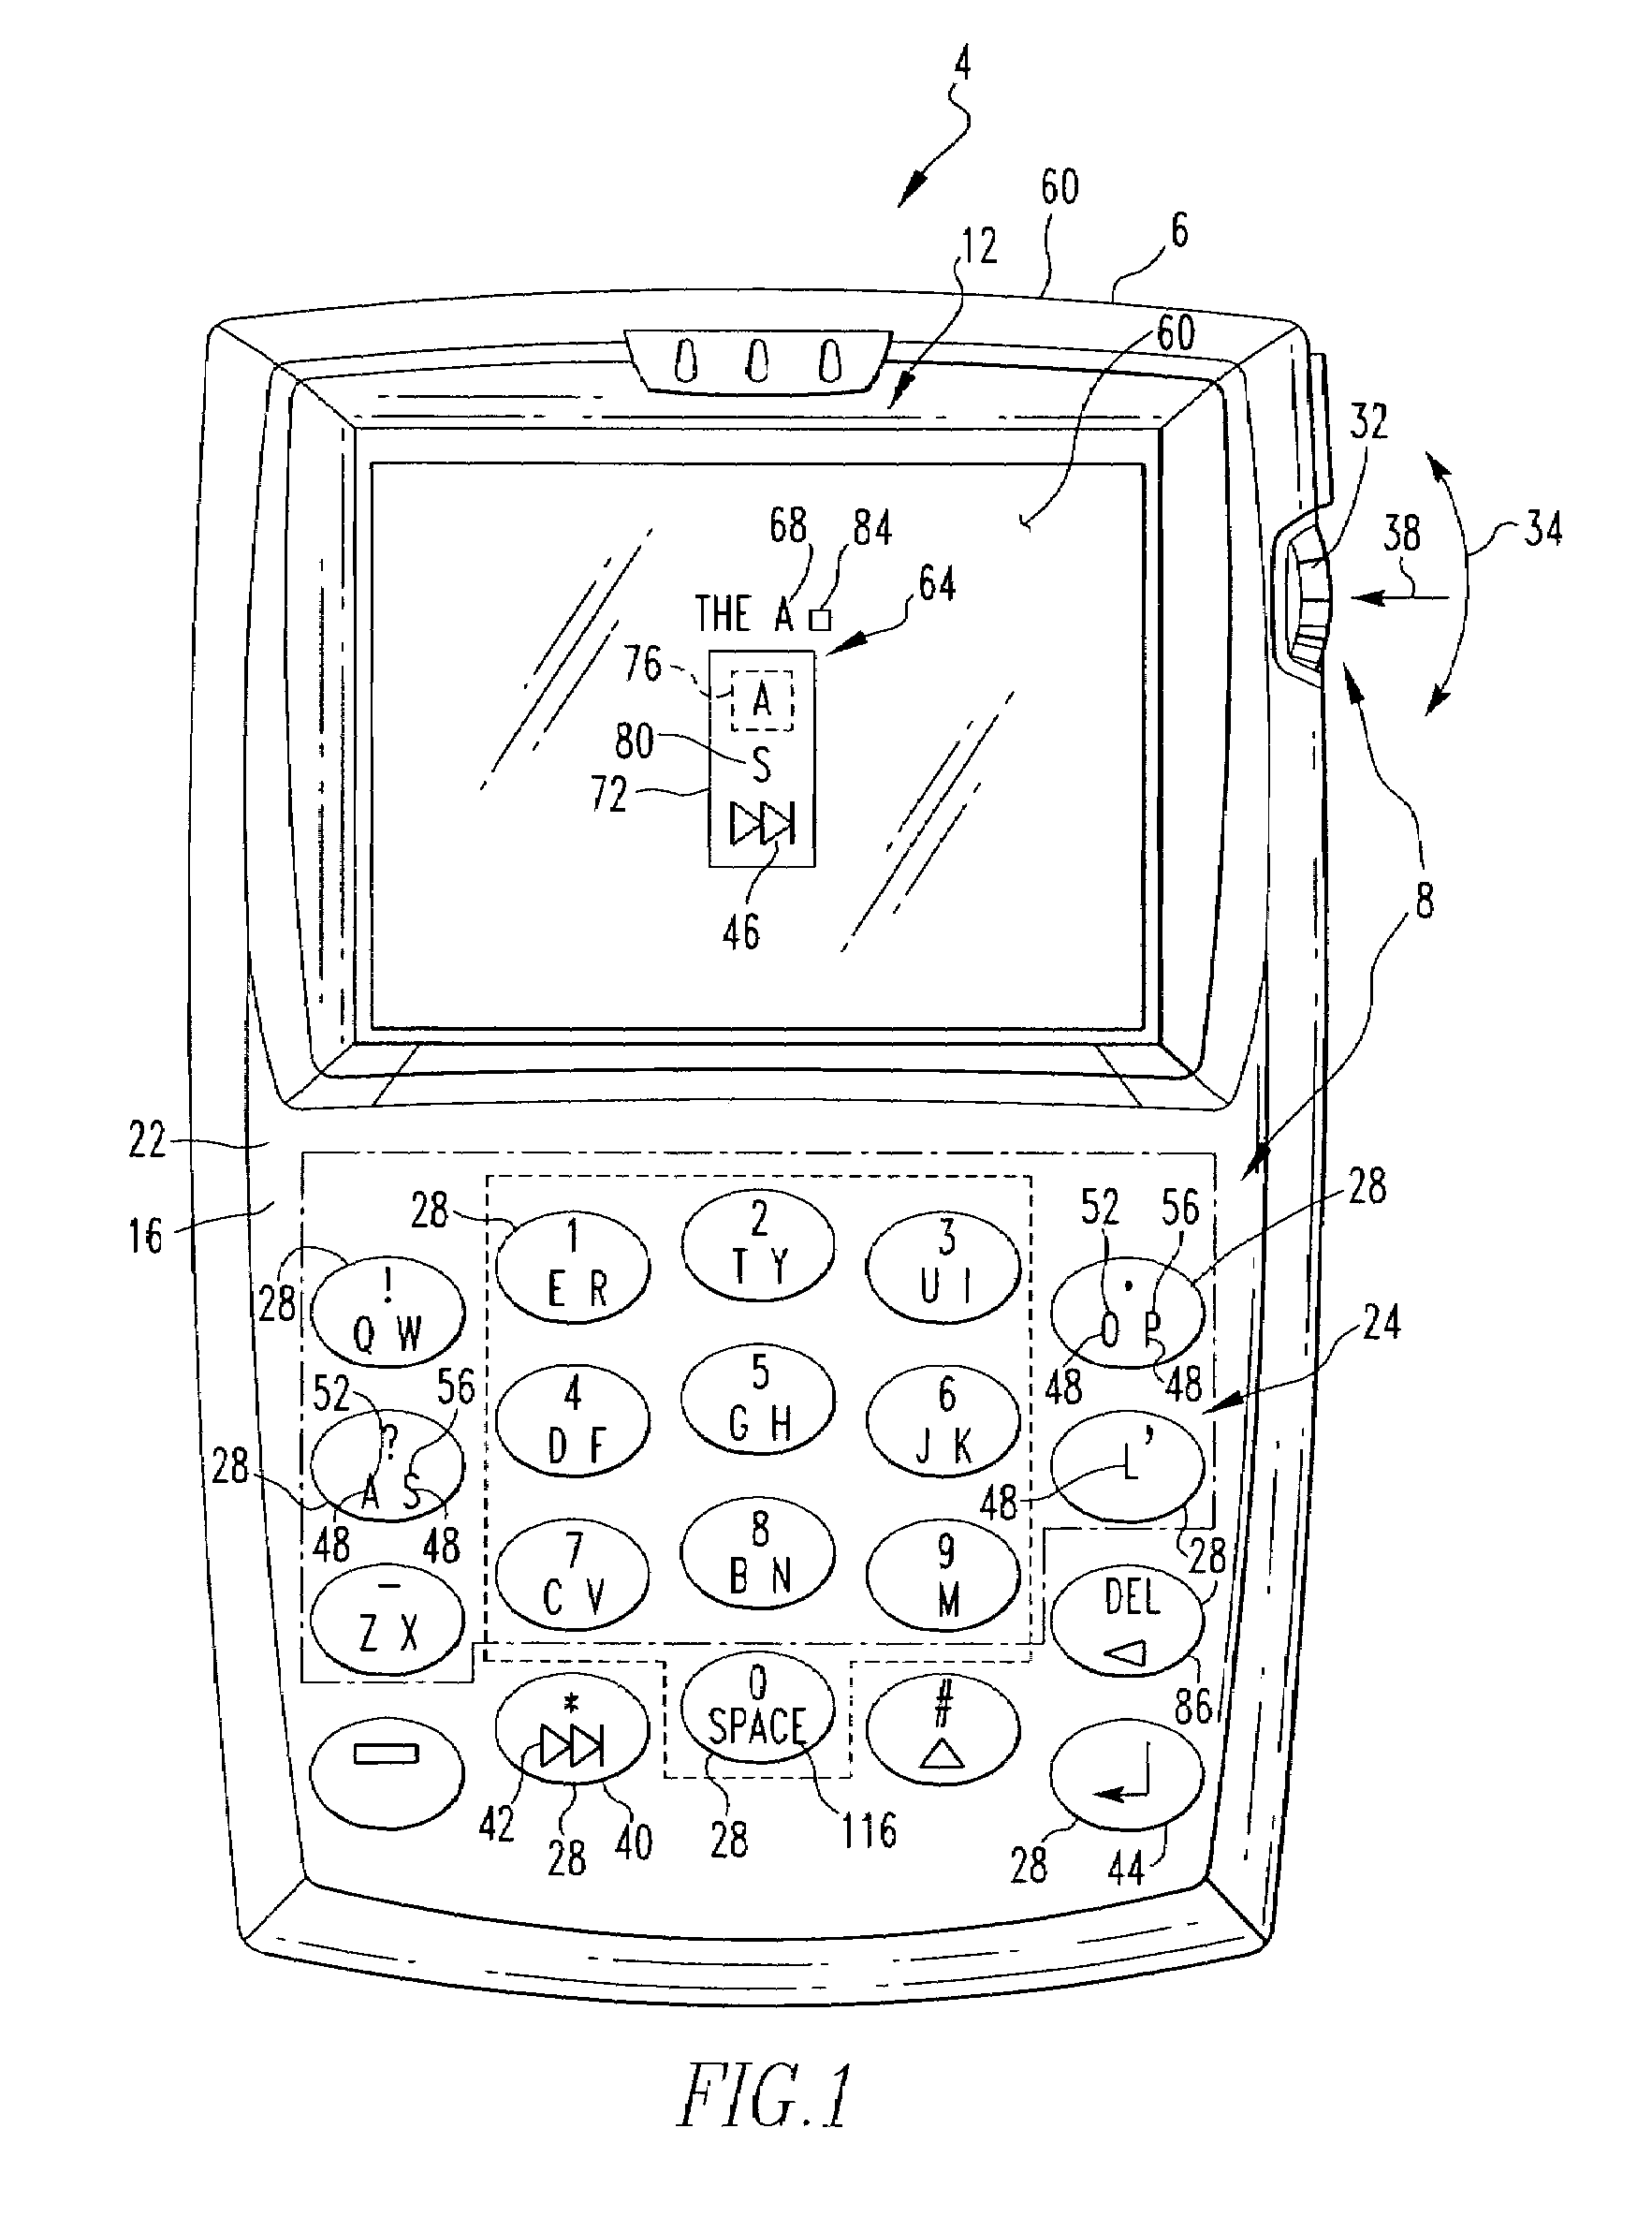 Handheld electronic device with text disambiguation